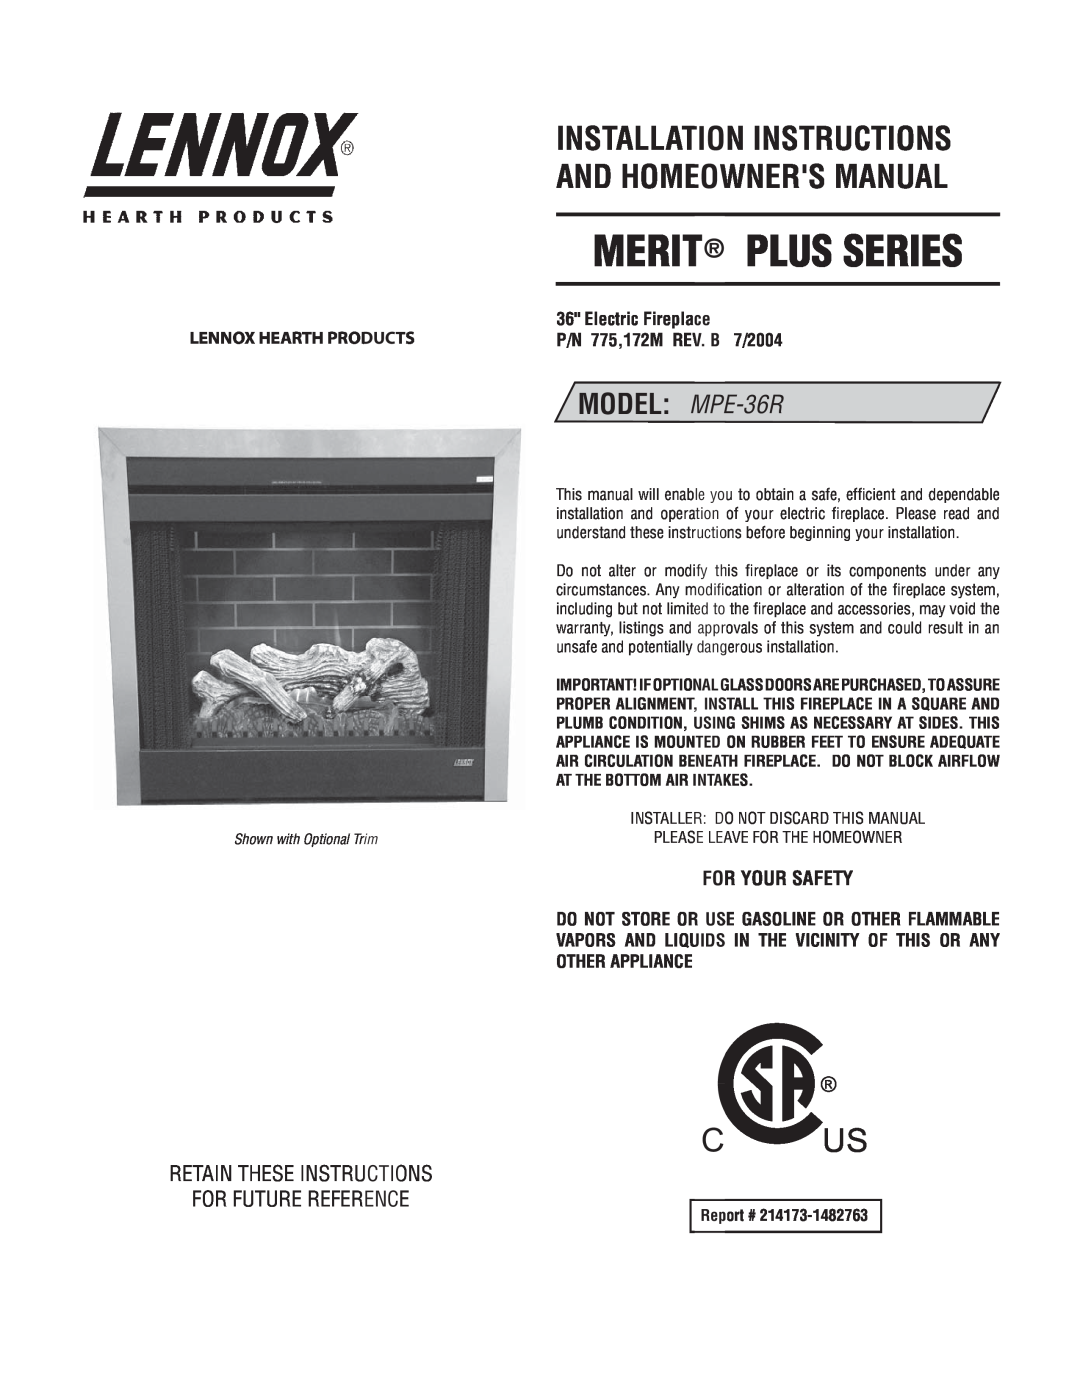 Lennox Hearth MPE-36R warranty Installer do not discard this manual, Please leave for the homeowner, Merit PLUS Series 